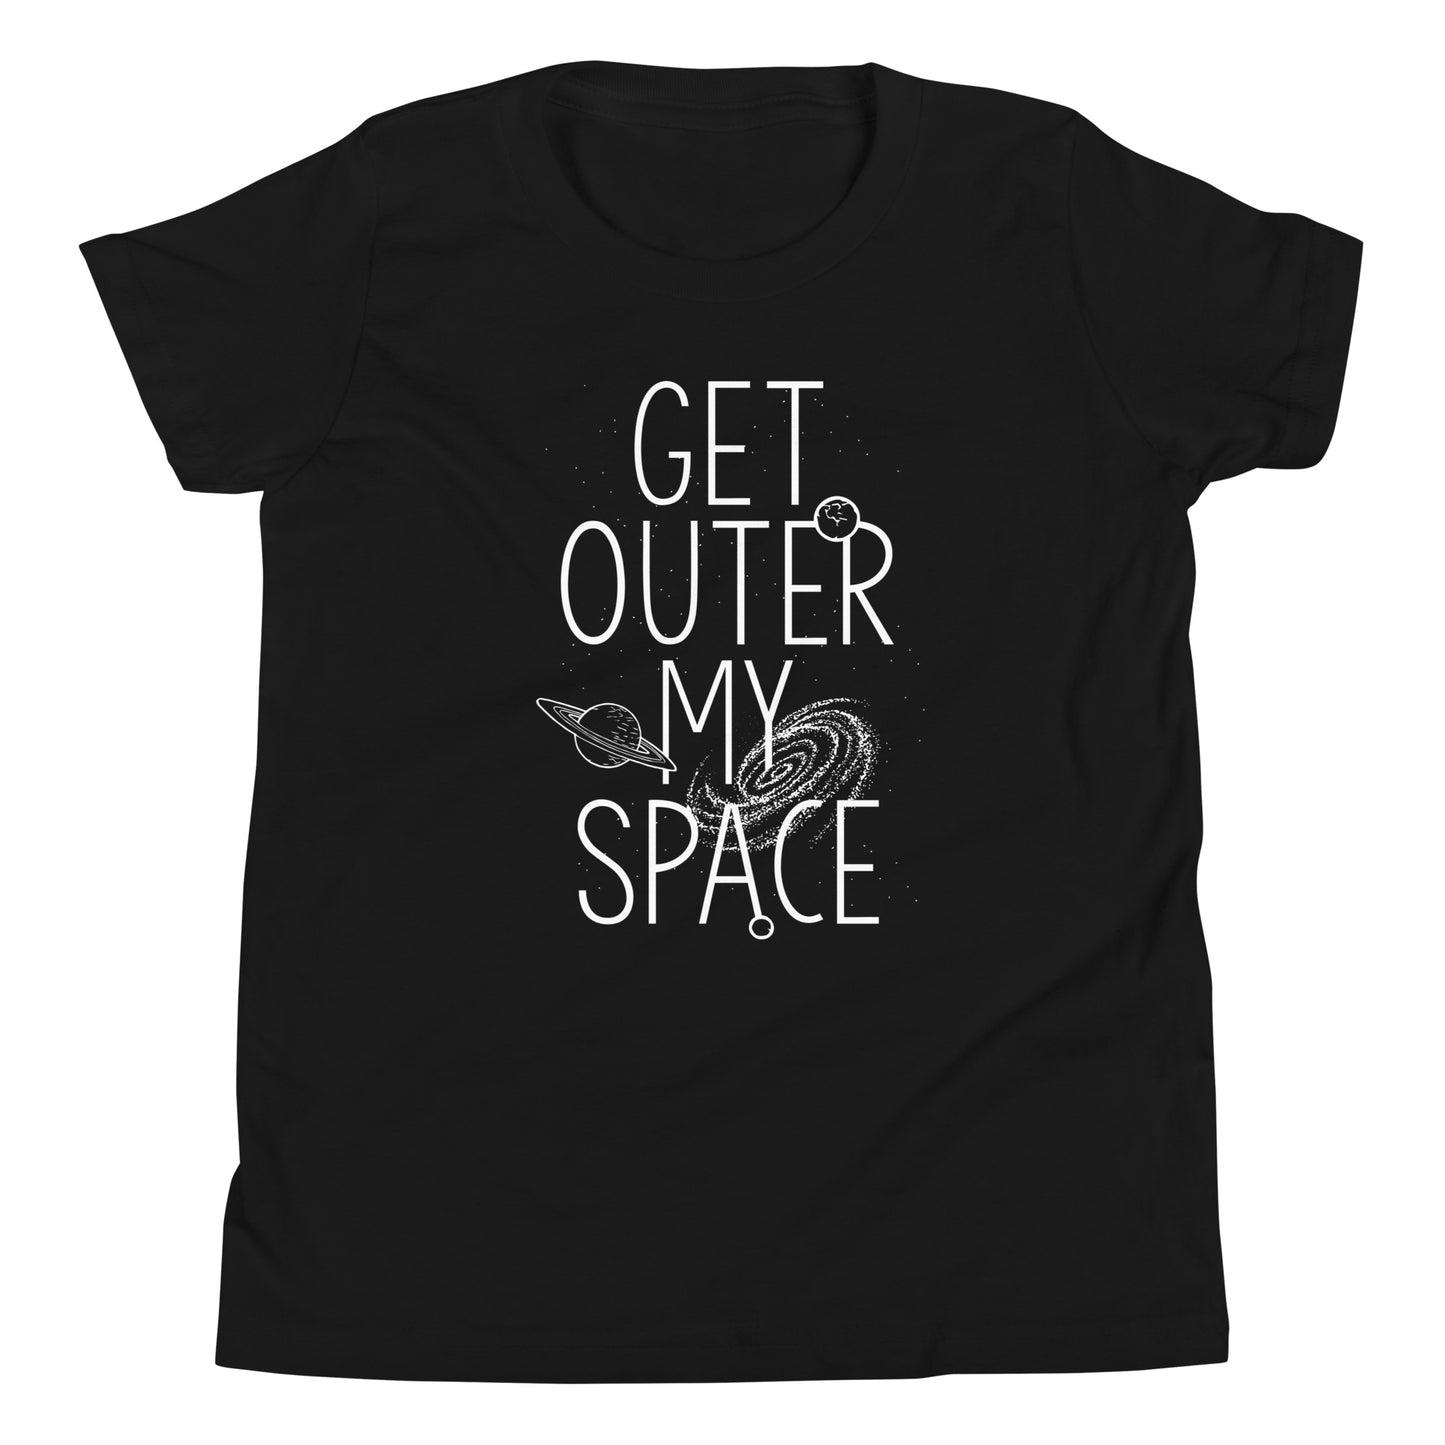 Get Outer My Space Kid's Youth Tee